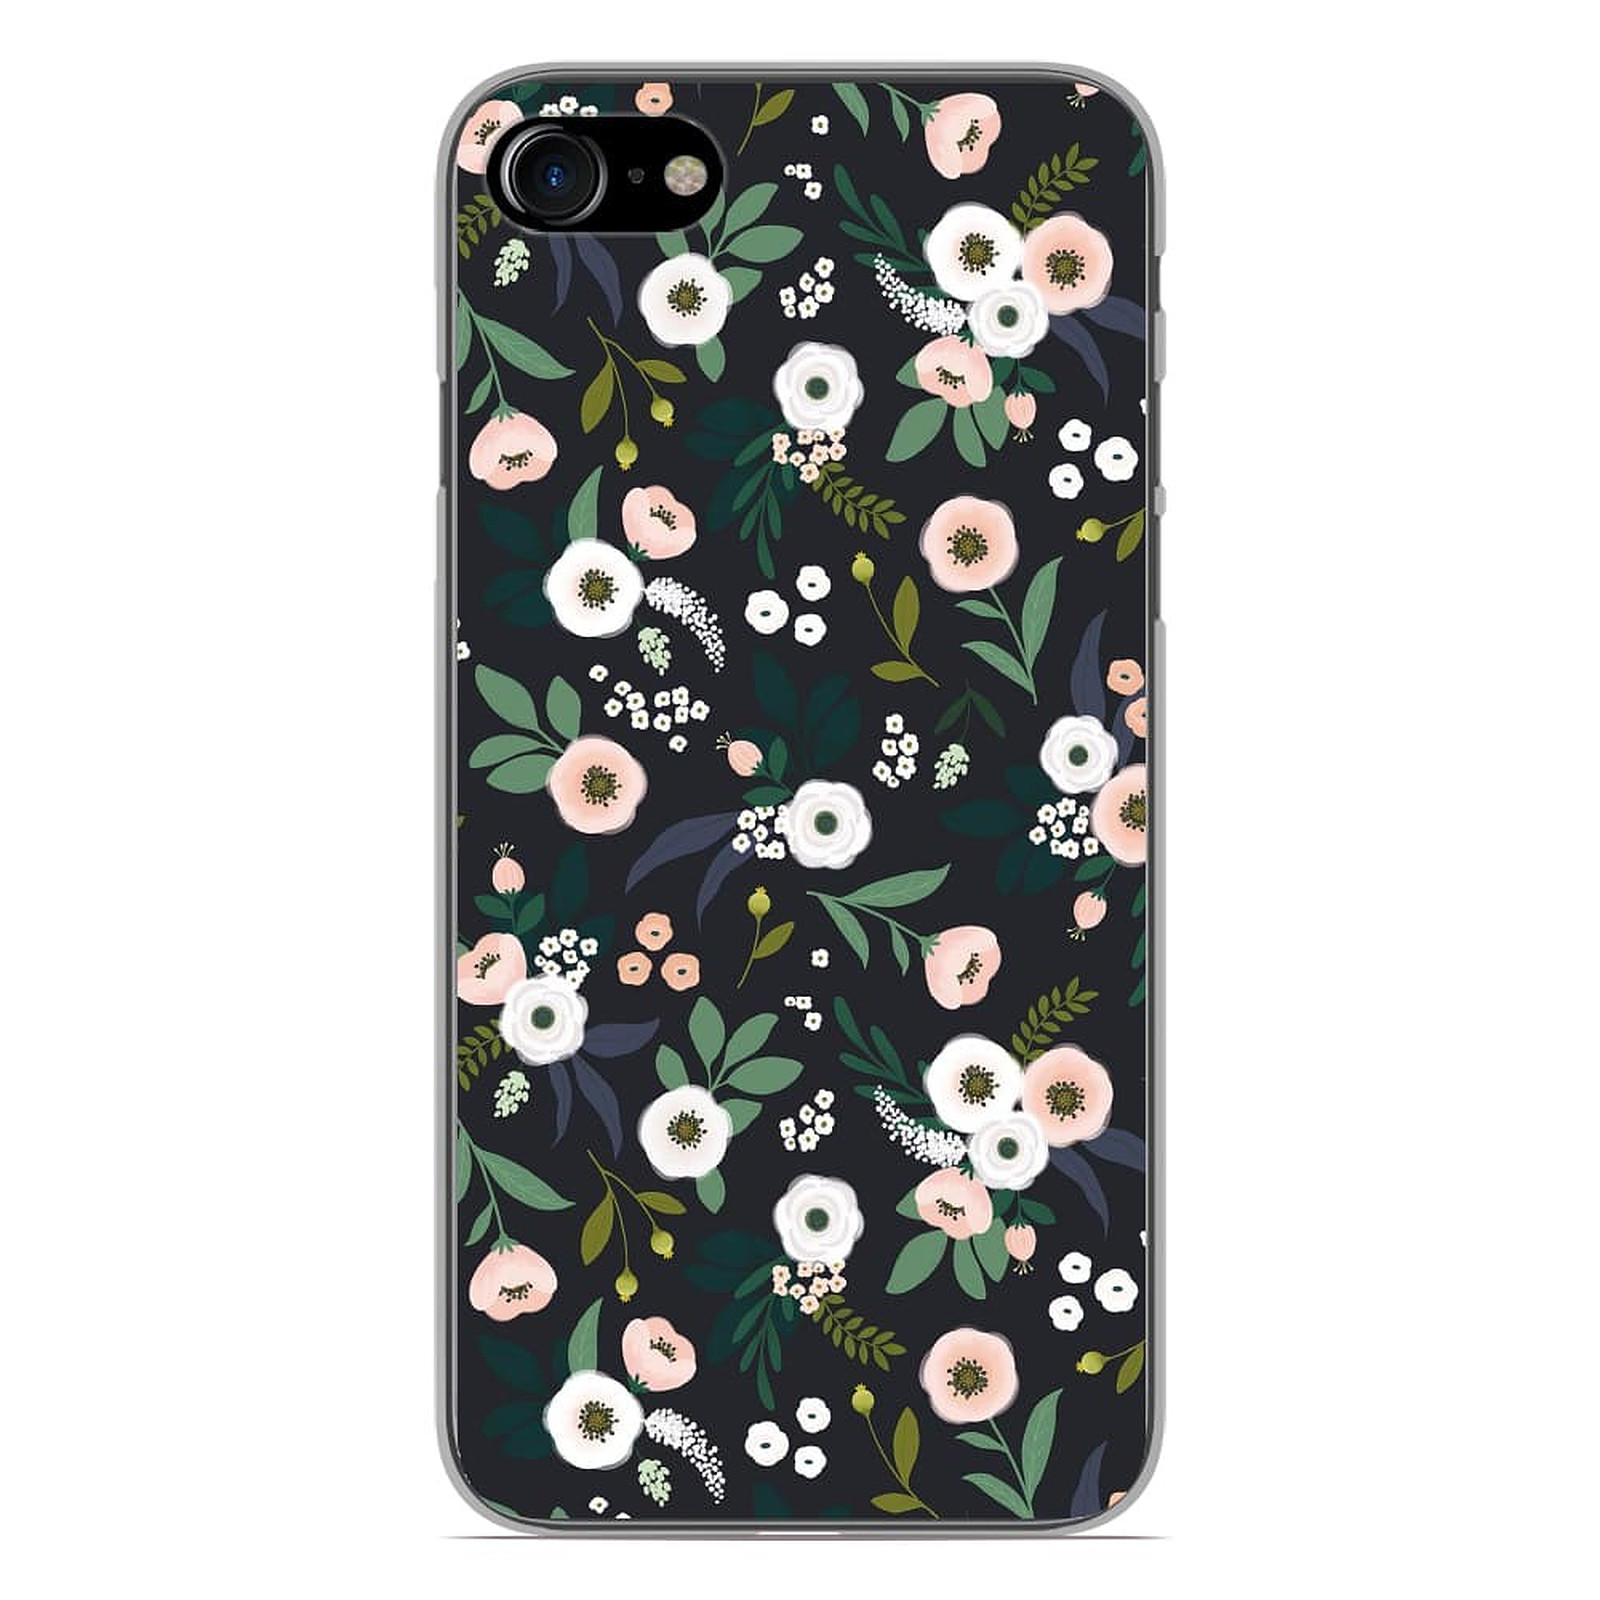 1001 Coques Coque silicone gel Apple iPhone 8 motif Flowers Noir - Coque telephone 1001Coques